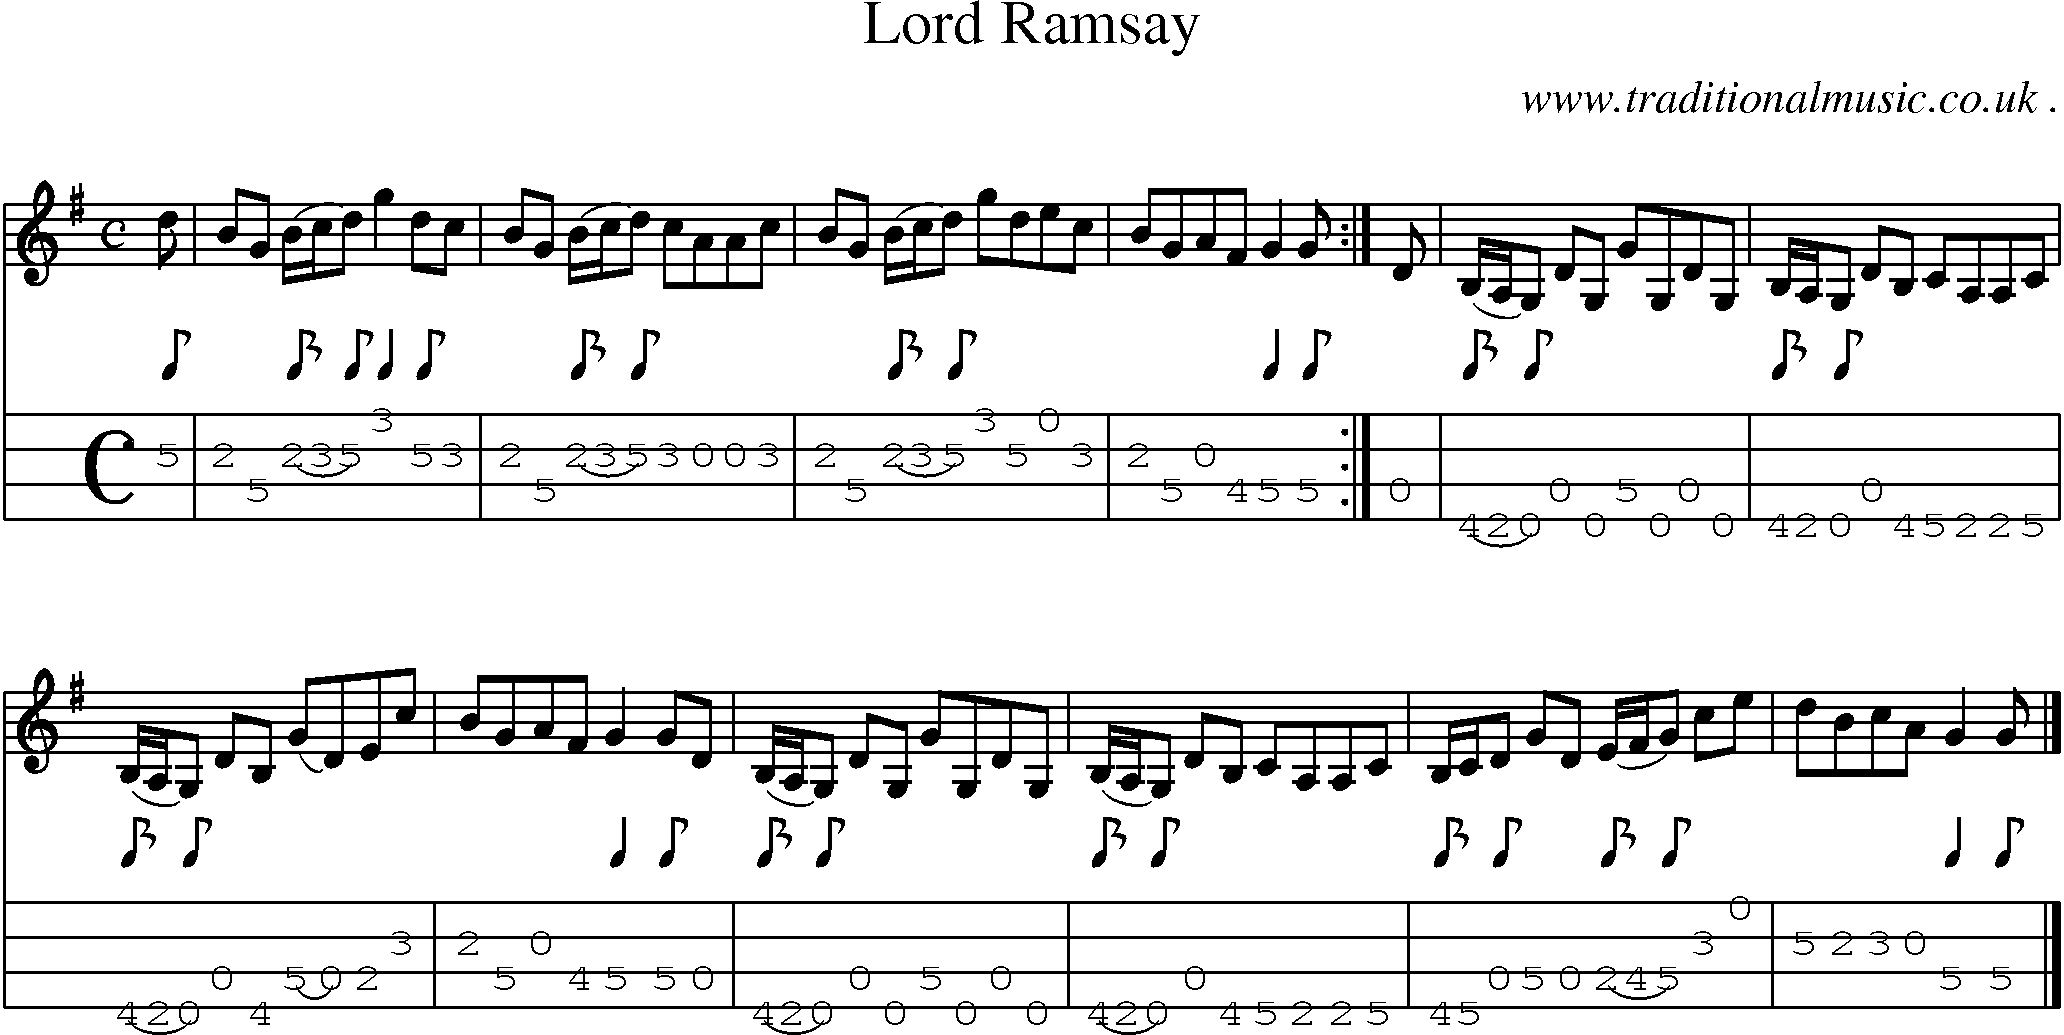 Sheet-music  score, Chords and Mandolin Tabs for Lord Ramsay